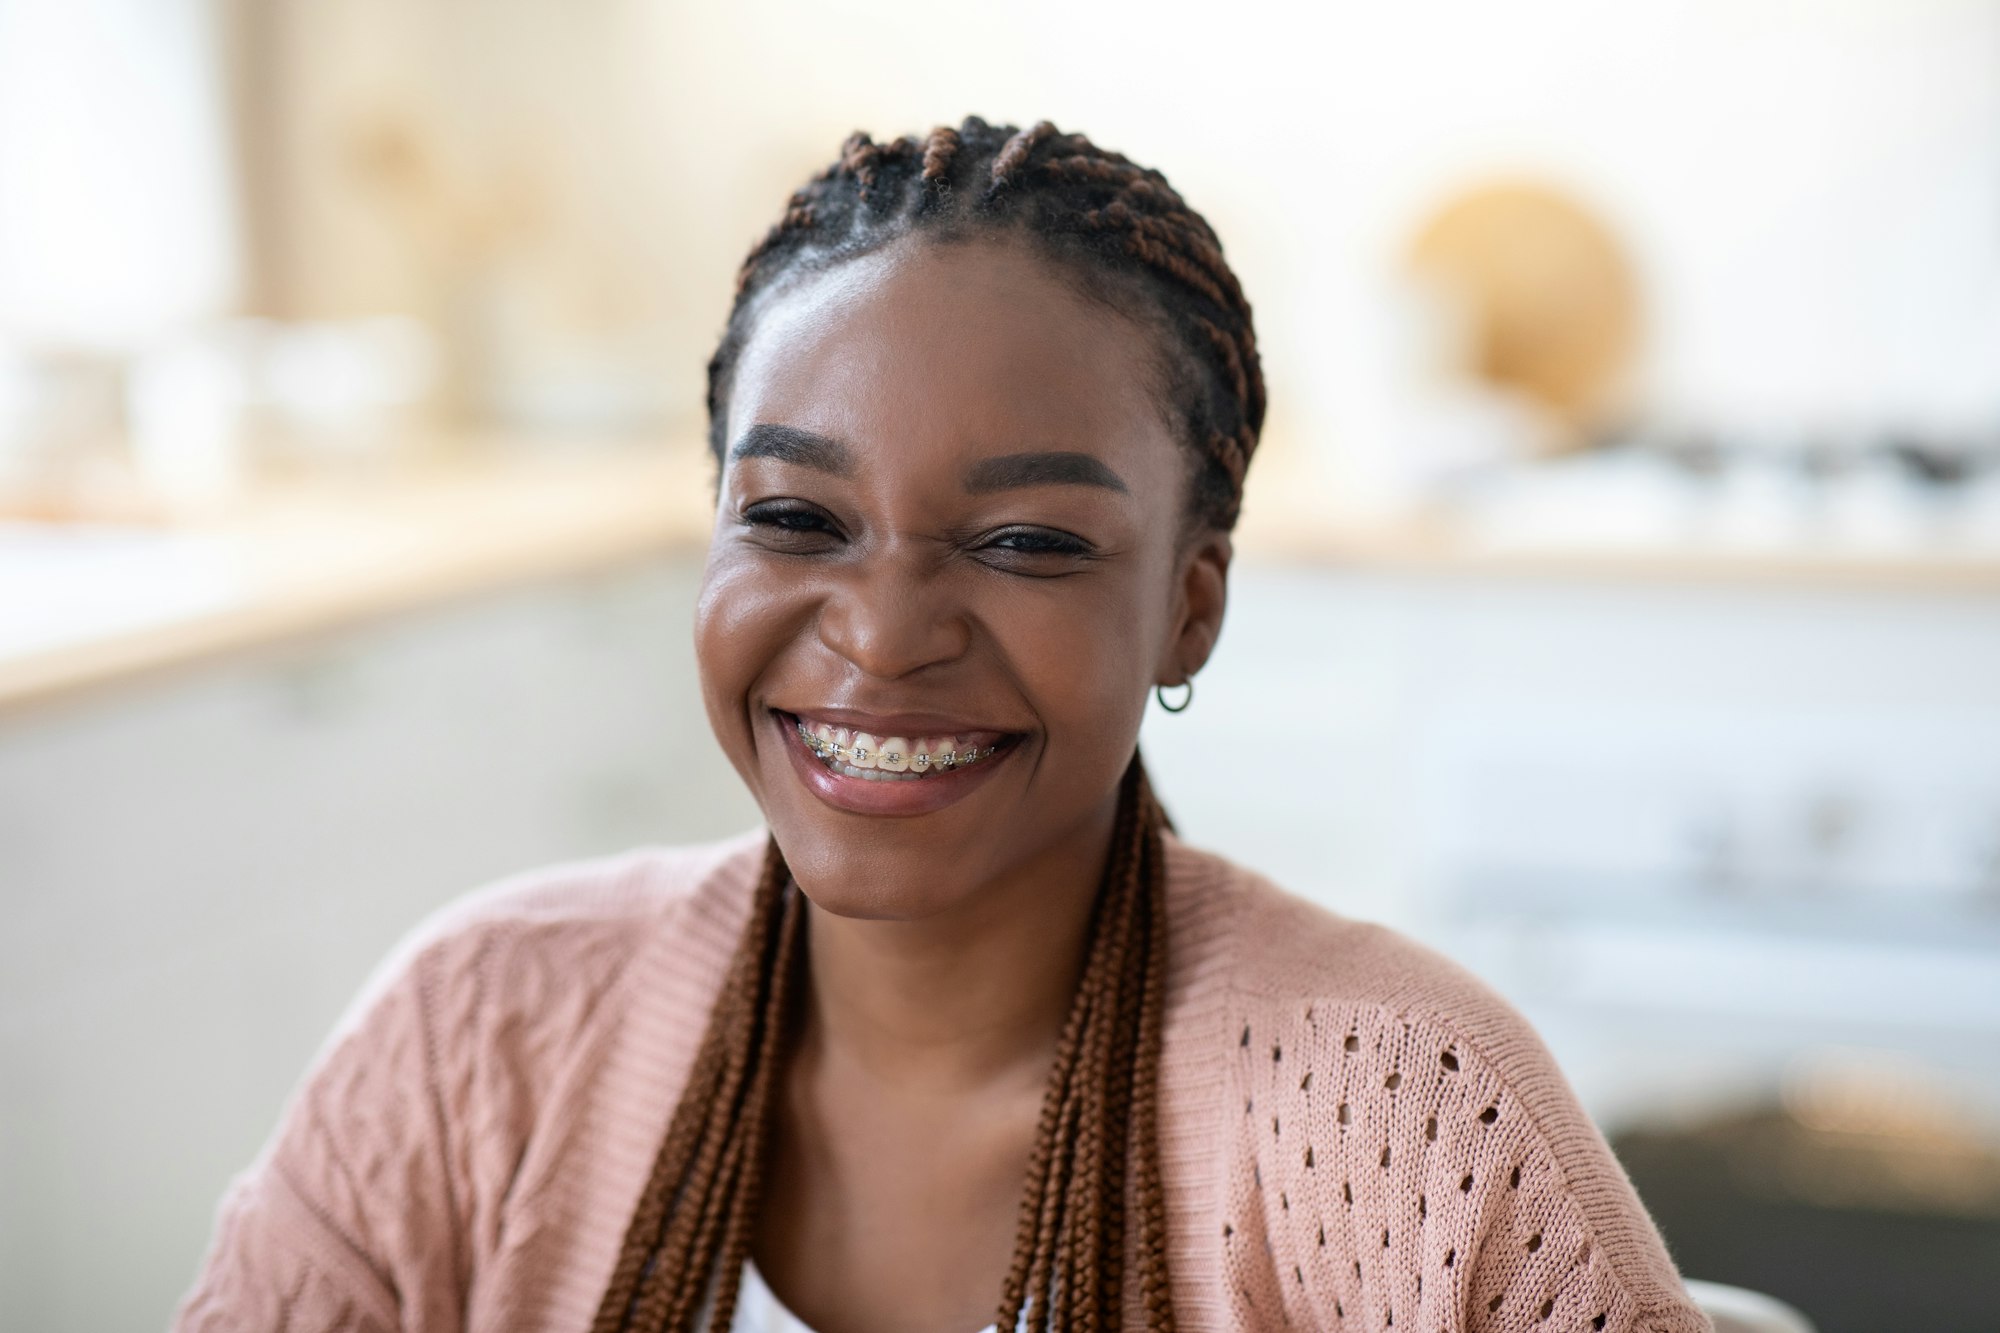 Beautiful Cheerful Black Woman With Braids And Dental Braces Posing In Kitchen